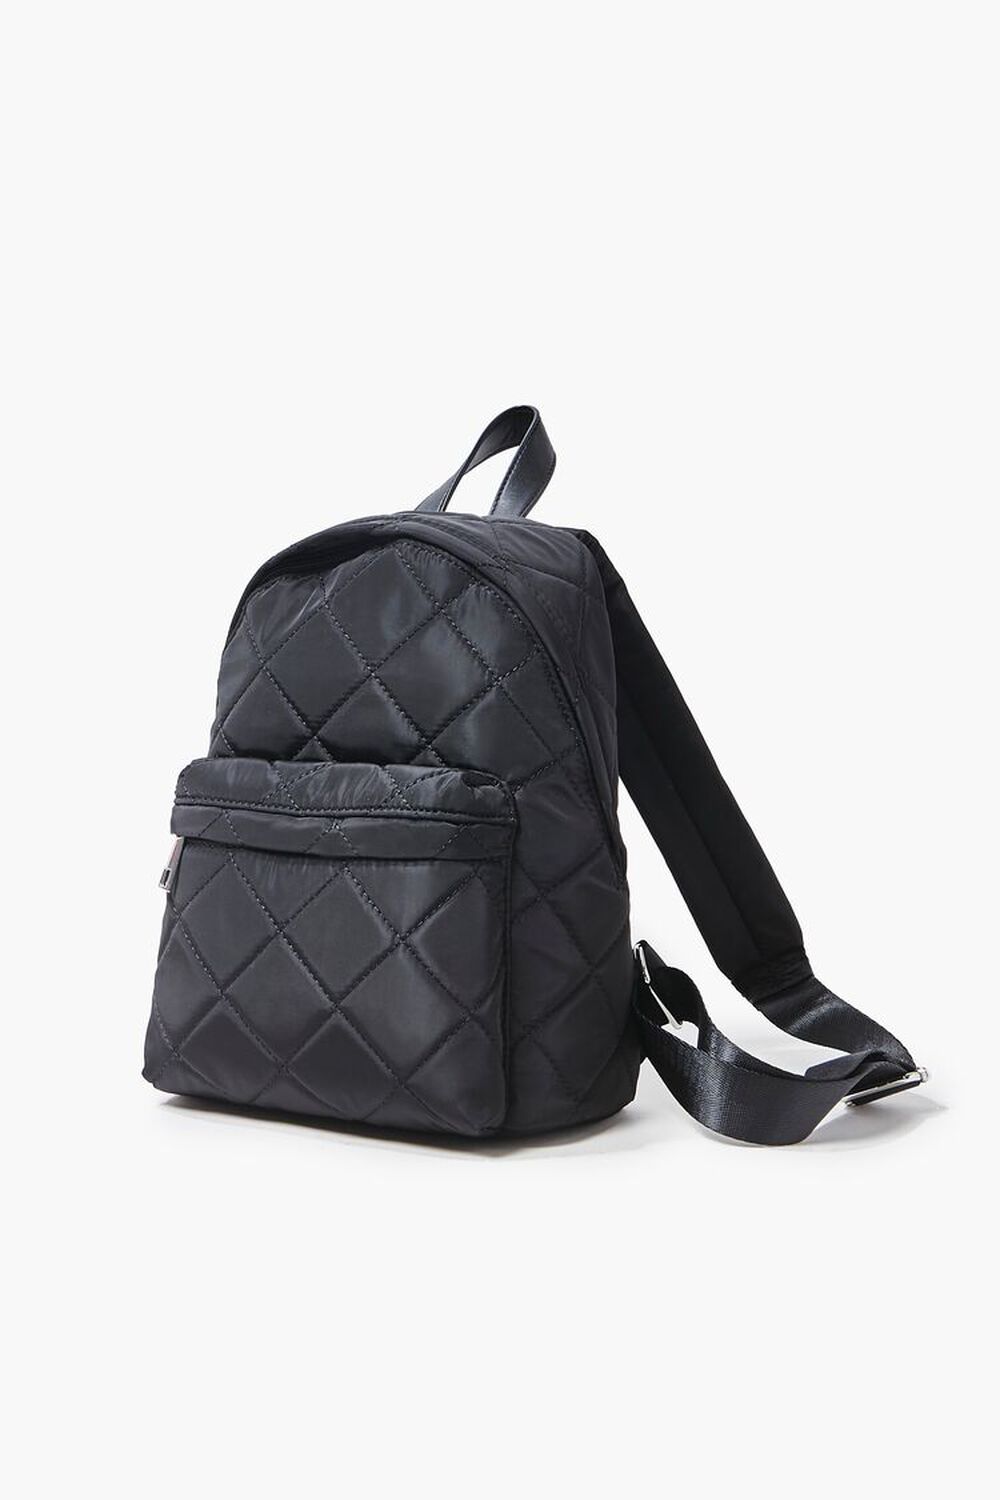 BLACK Quilted Zip-Up Backpack, image 2